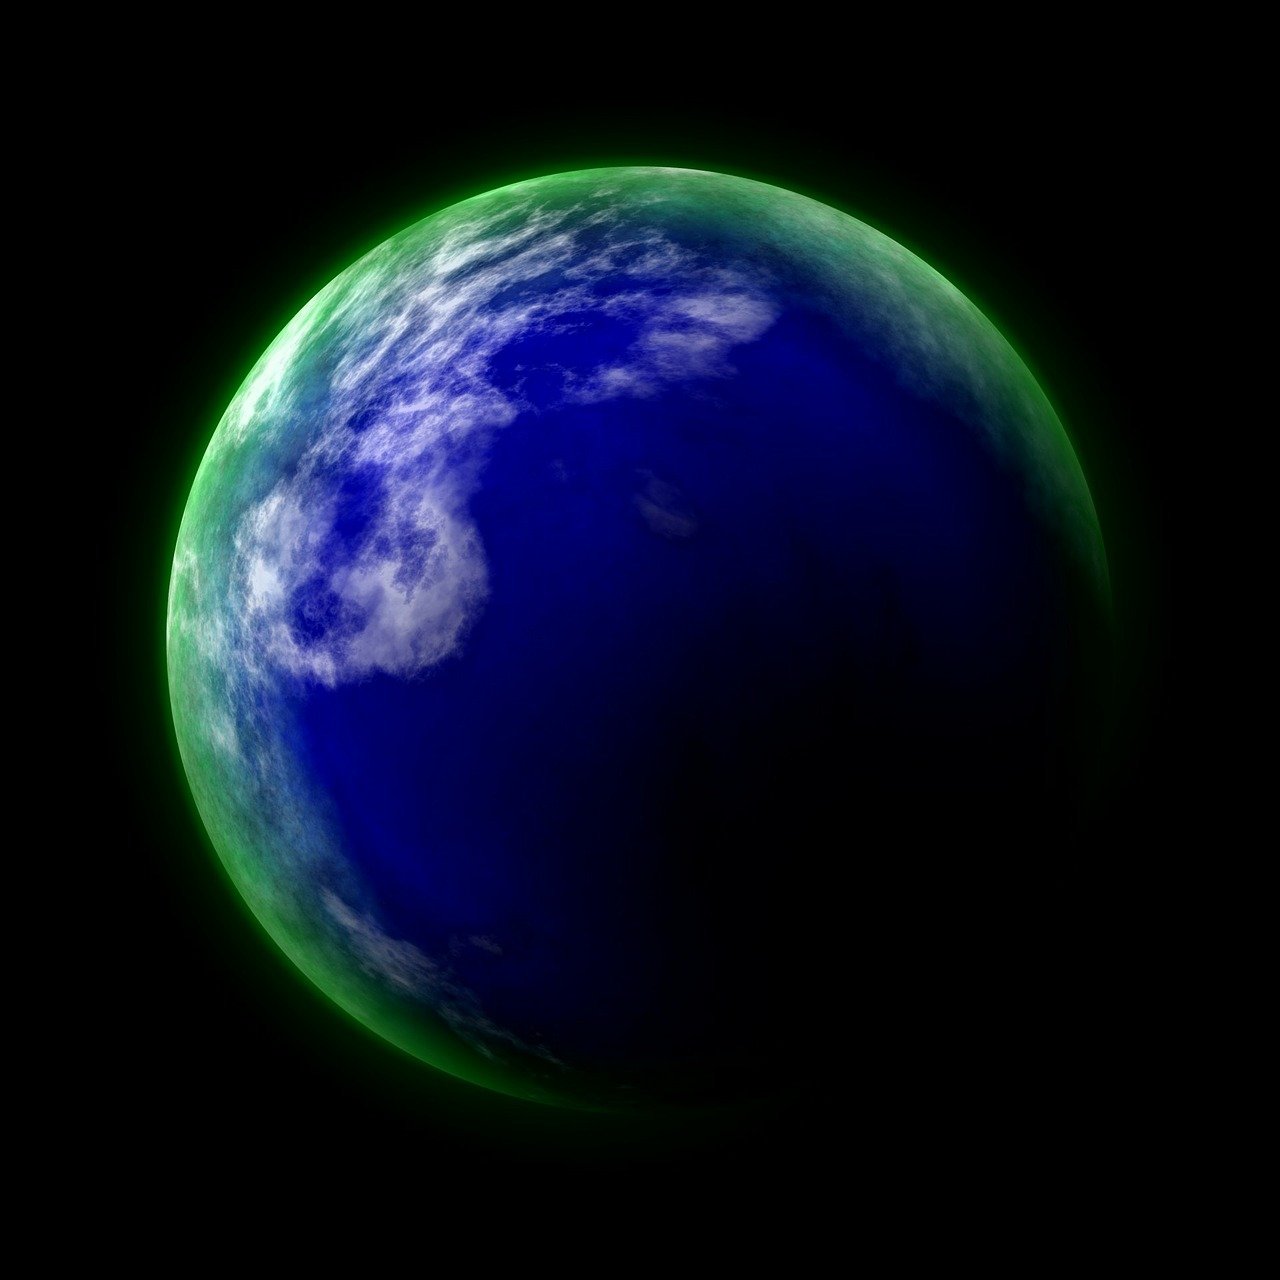 an image of the earth taken from space, a raytraced image, hurufiyya, green bioluminescent chrometype, computer generated, circular planet, cobalt